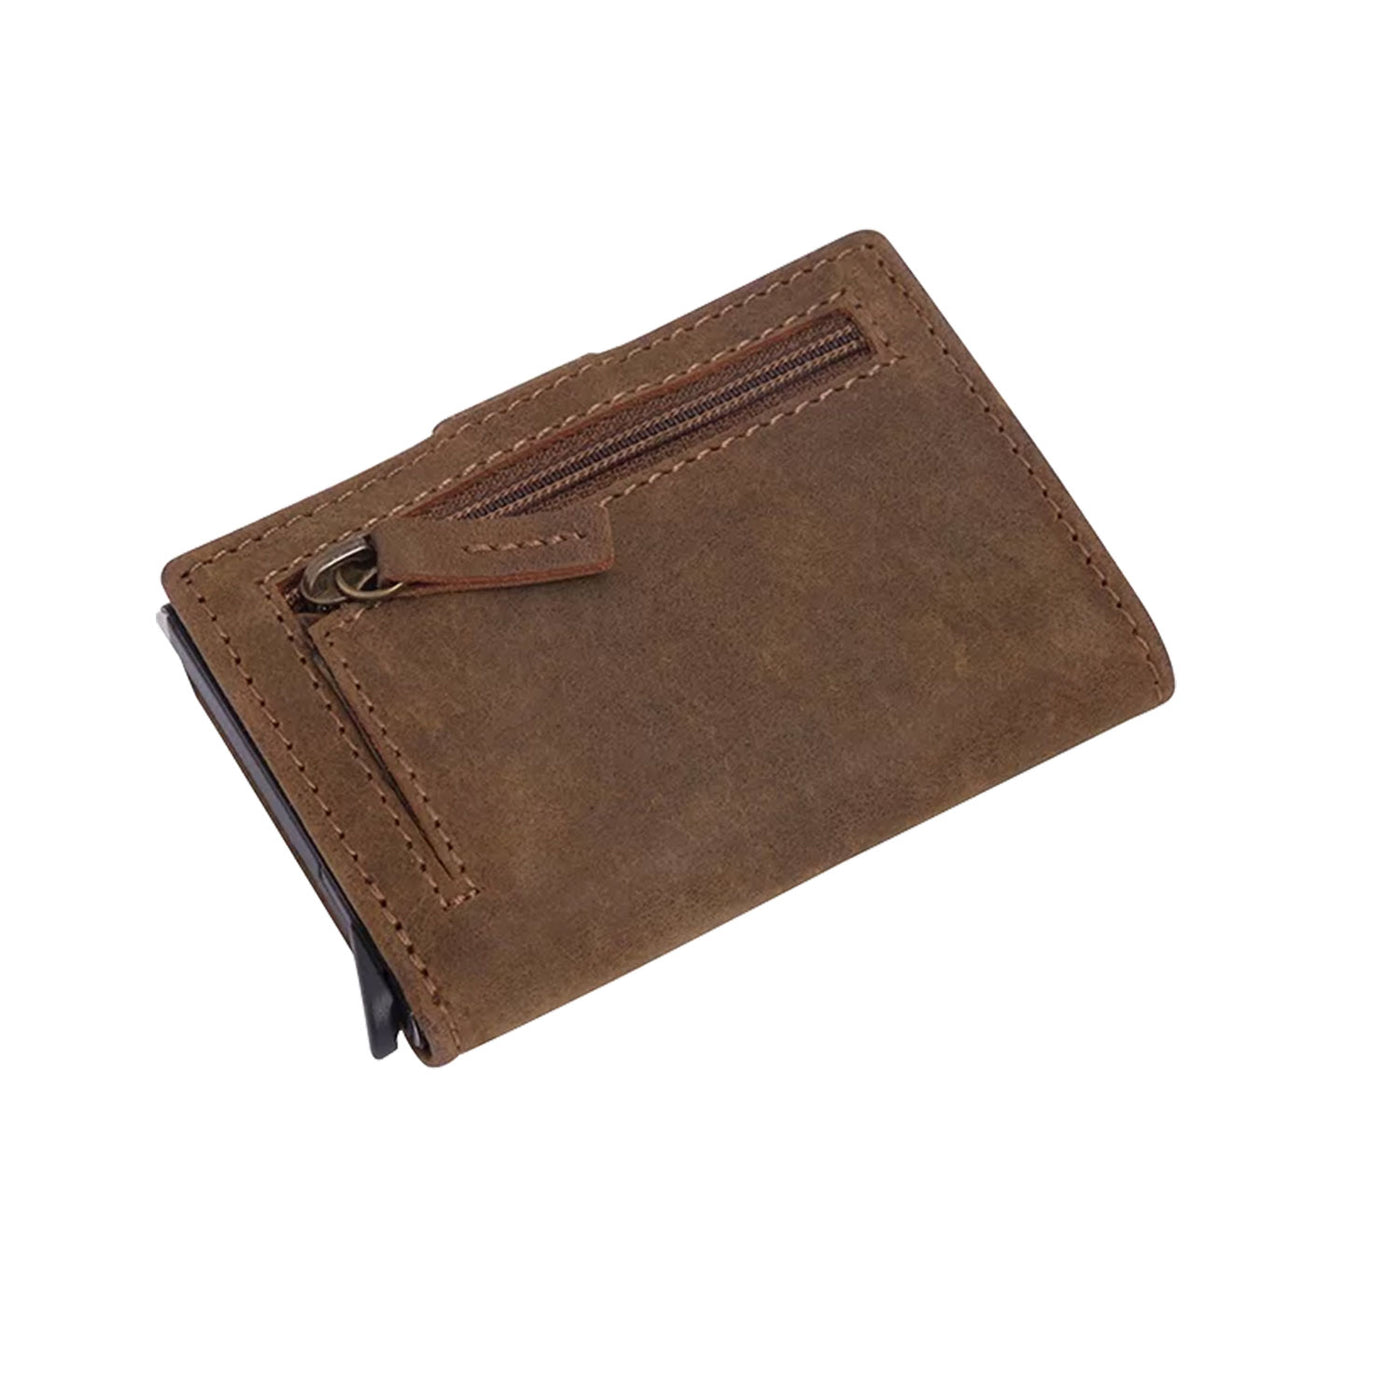 Slim Wallet - Tuscany - Red - Scudo